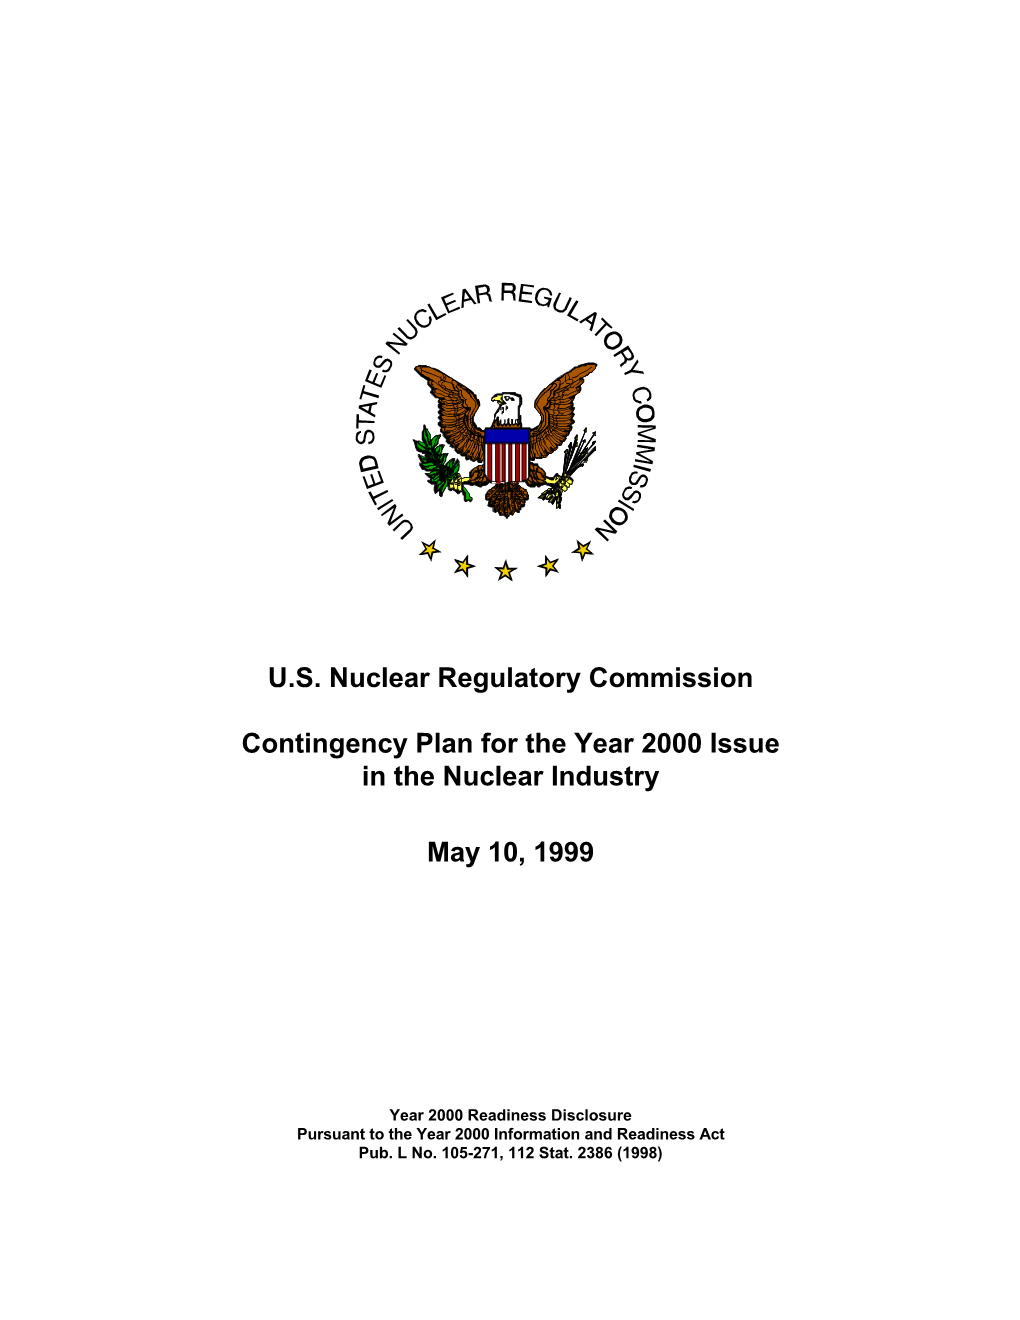 U.S. Nuclear Regulatory Commission Contingency Plan for the Year 2000